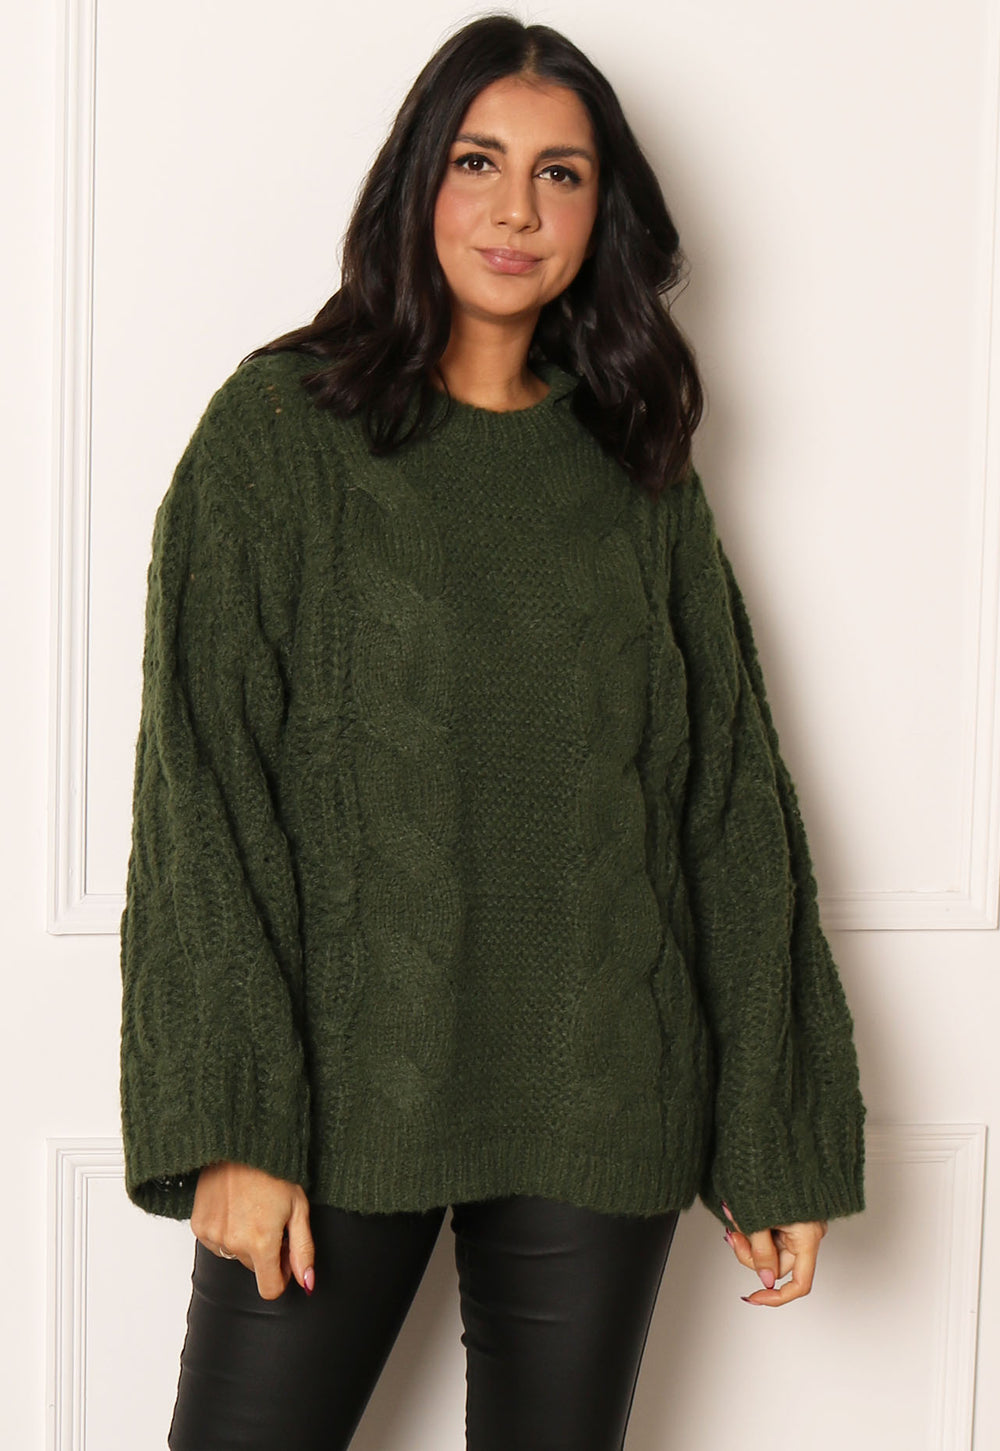 VERO MODA Vea Premium Chunky Cable Knit Fluffy Jumper in Khaki Green - One Nation Clothing